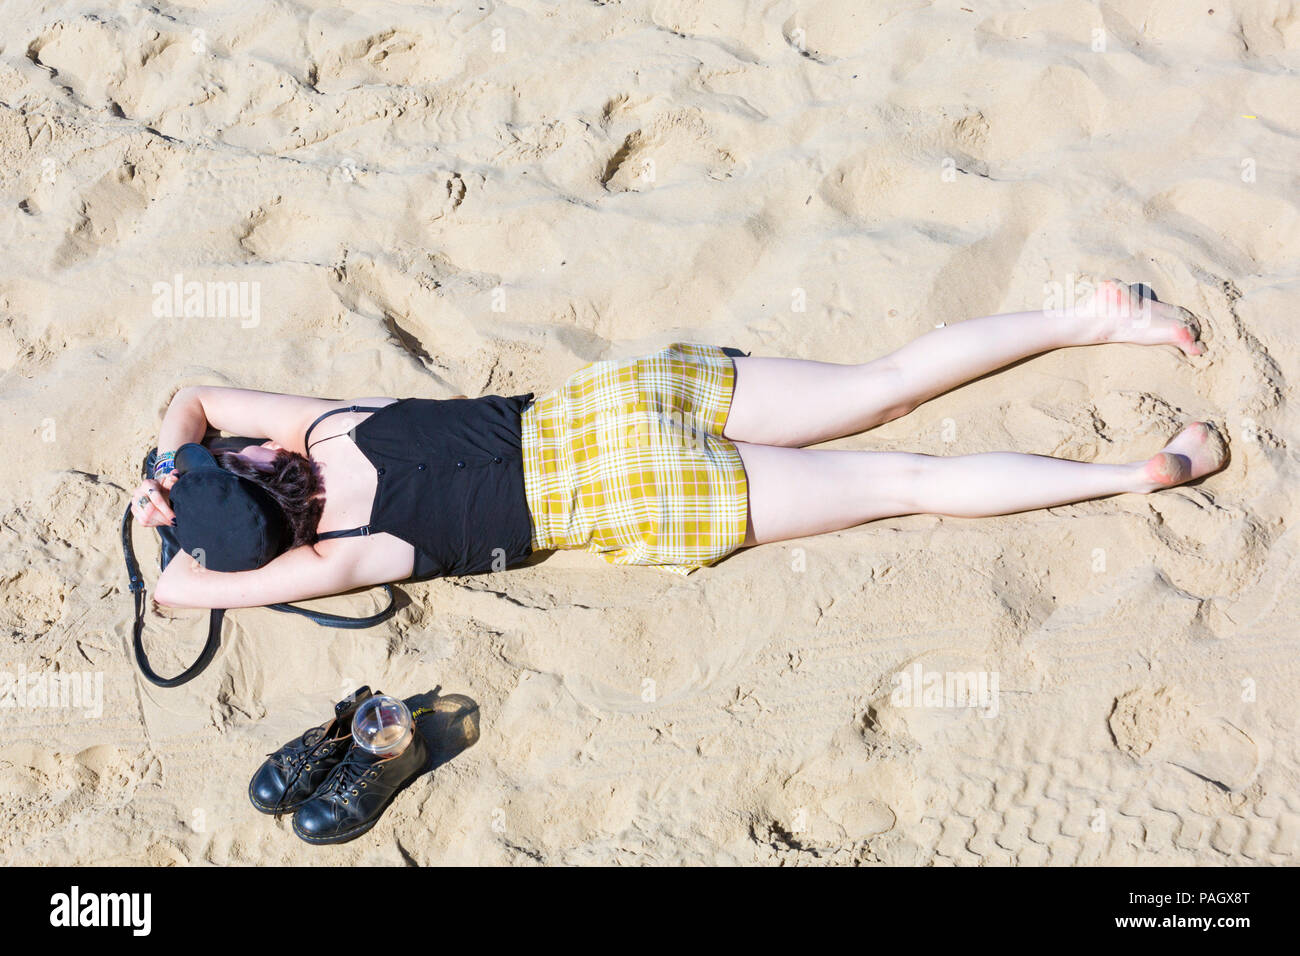 Bournemouth, Dorset, UK. 23rd July 2018. UK weather: the heatwave continues as temperatures rise on a scorching hot and sunny day at Bournemouth beaches with blue skies and unbroken sunshine. Sunseekers head to the seaside to soak up the sun. Woman sunbathing on the beach. Credit: Carolyn Jenkins/Alamy Live News Stock Photo